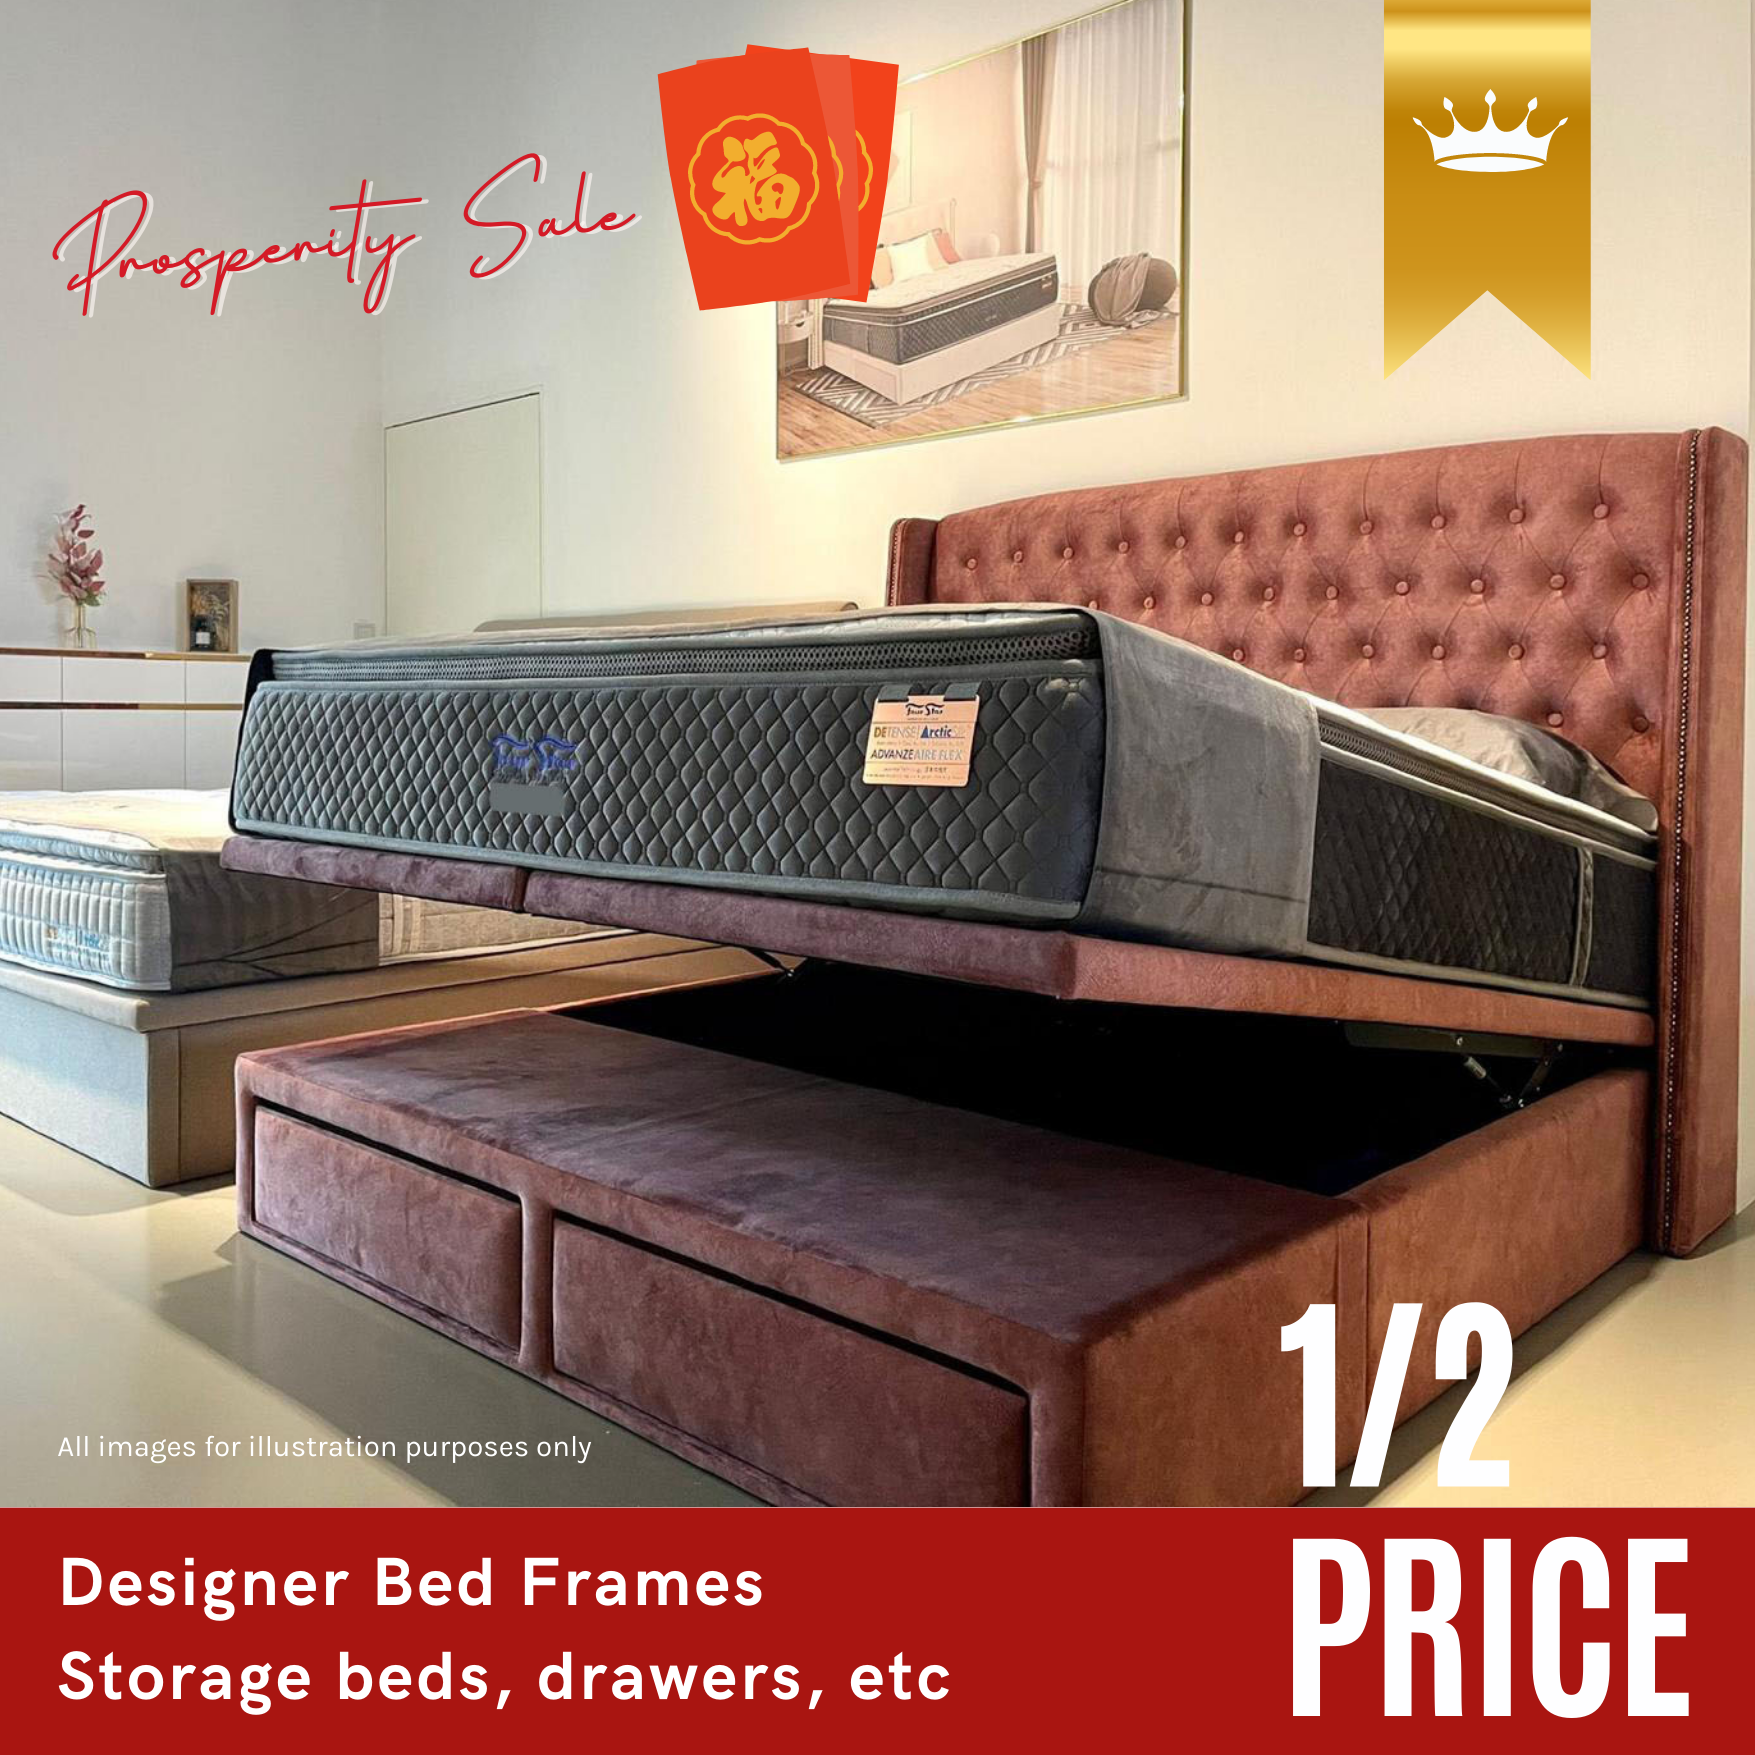 Lobang: Four Star's CNY Prosperity Sale Has Over 5,000 items At Up To 50% Off Including Mattresses, Bed Frames, Sofas & More - 9